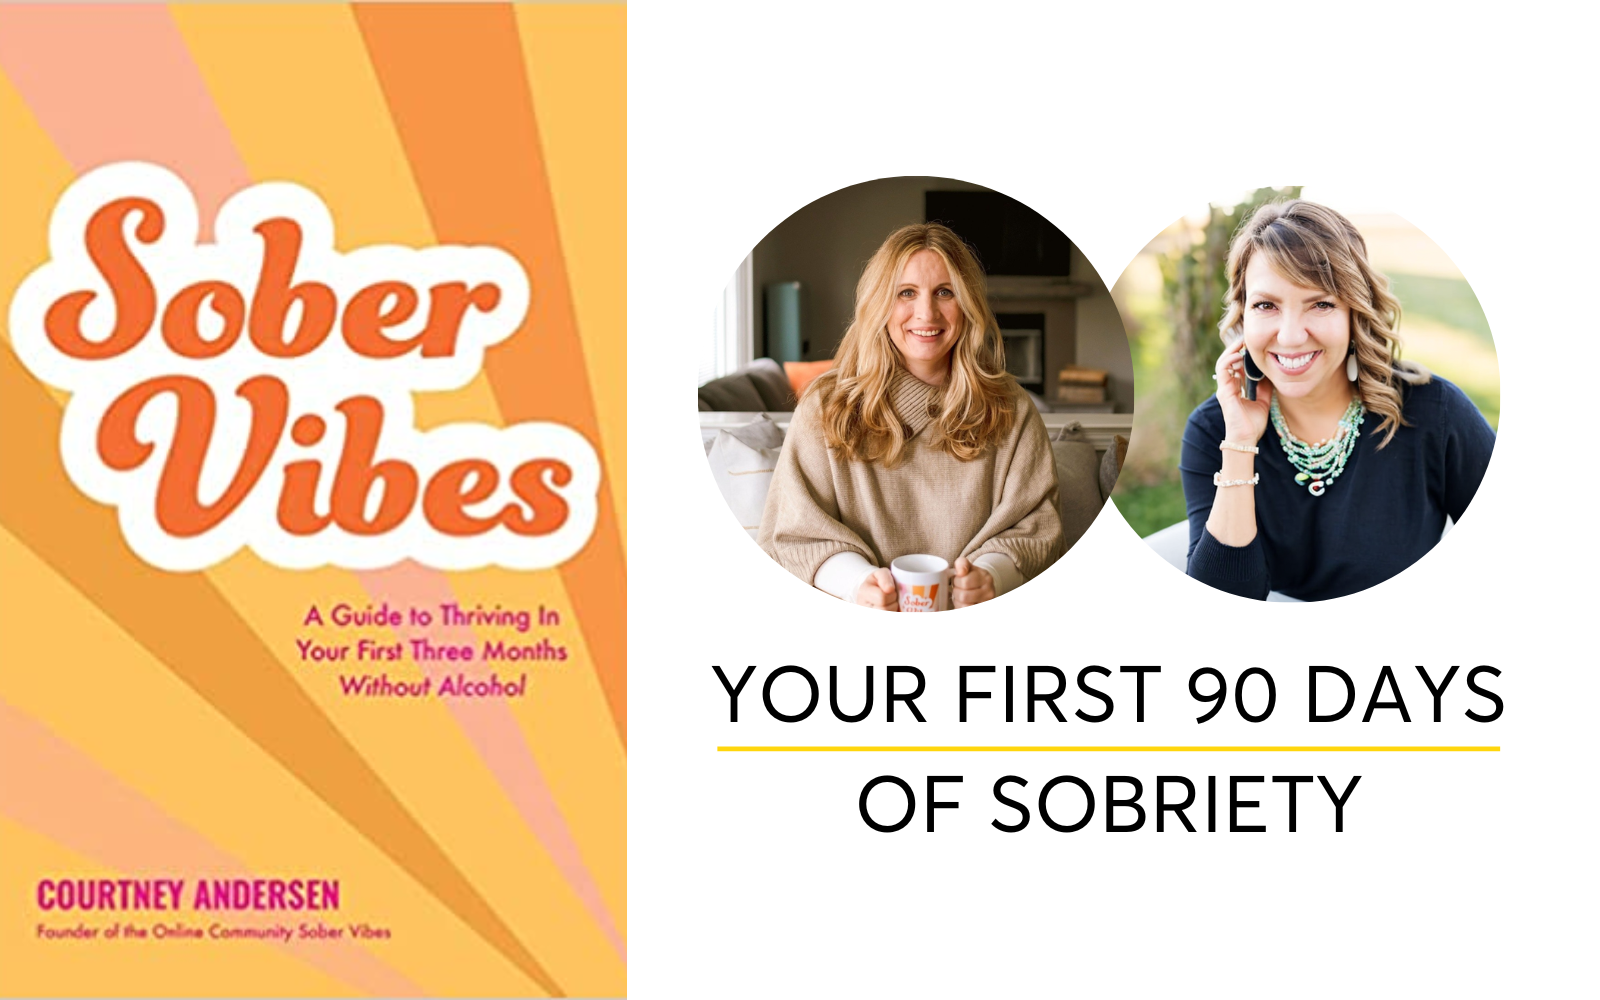 What Can You Expect In Your First 90 Days Of Sobriety